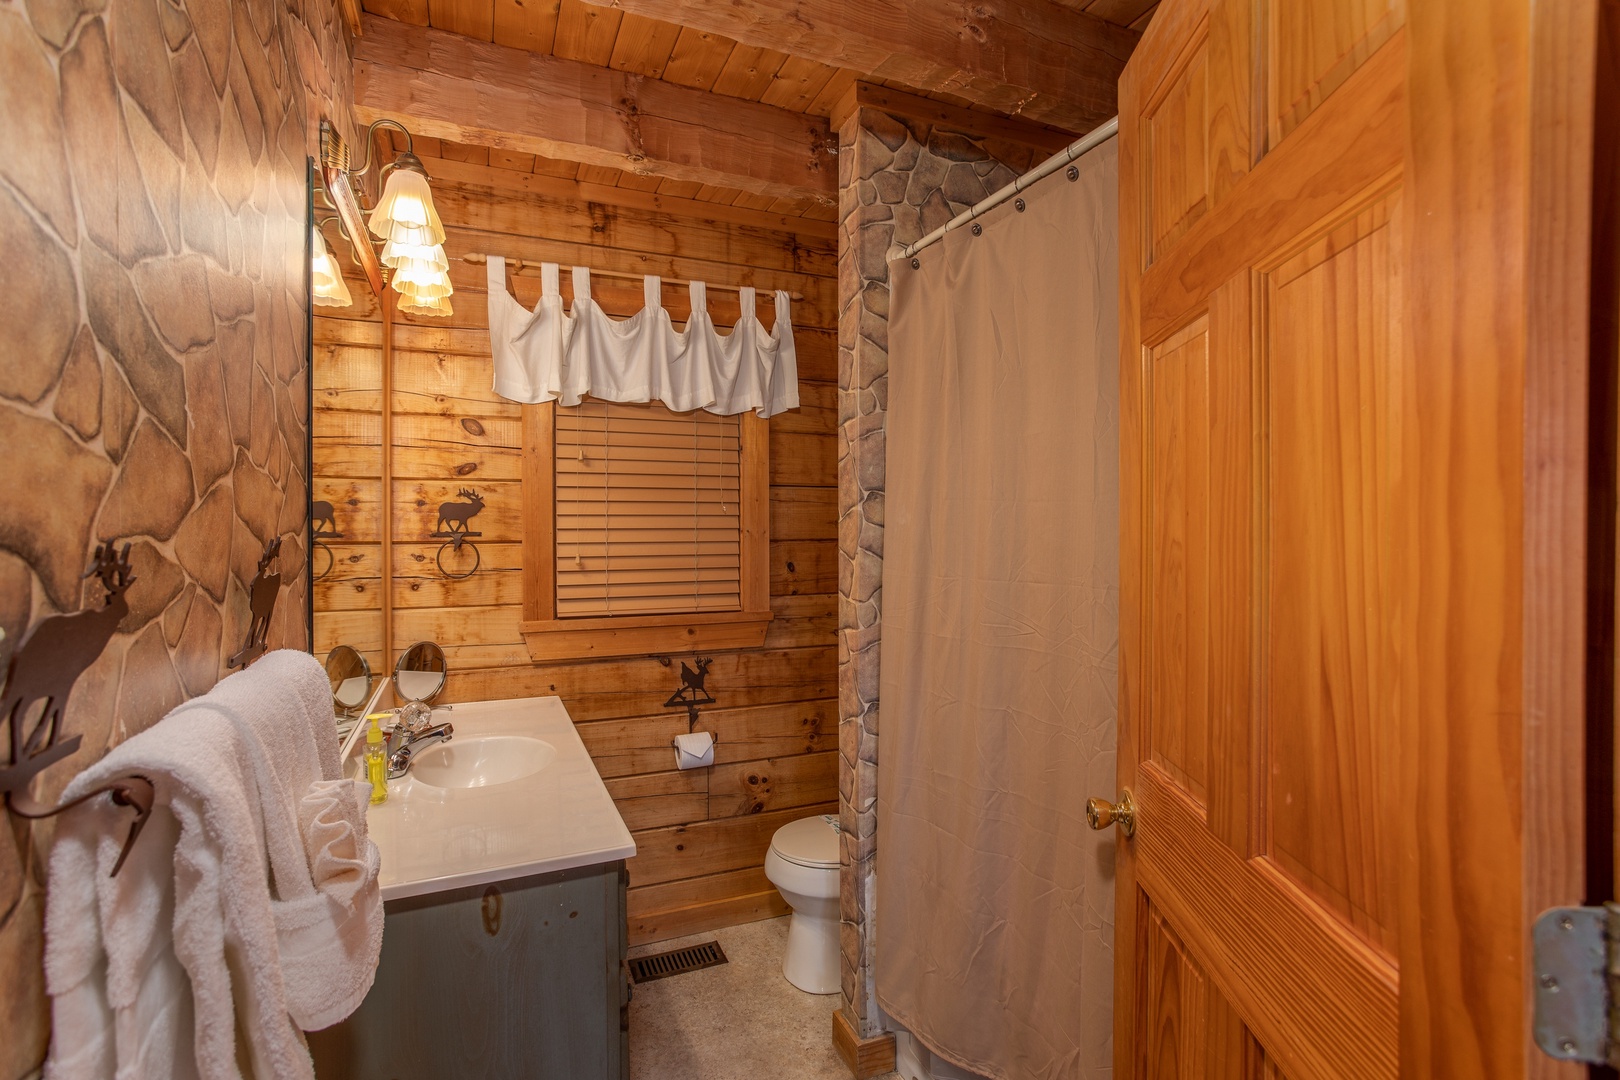 Bathroom at Cabin in the Clouds, a 3-bedroom cabin rental located in Pigeon Forge